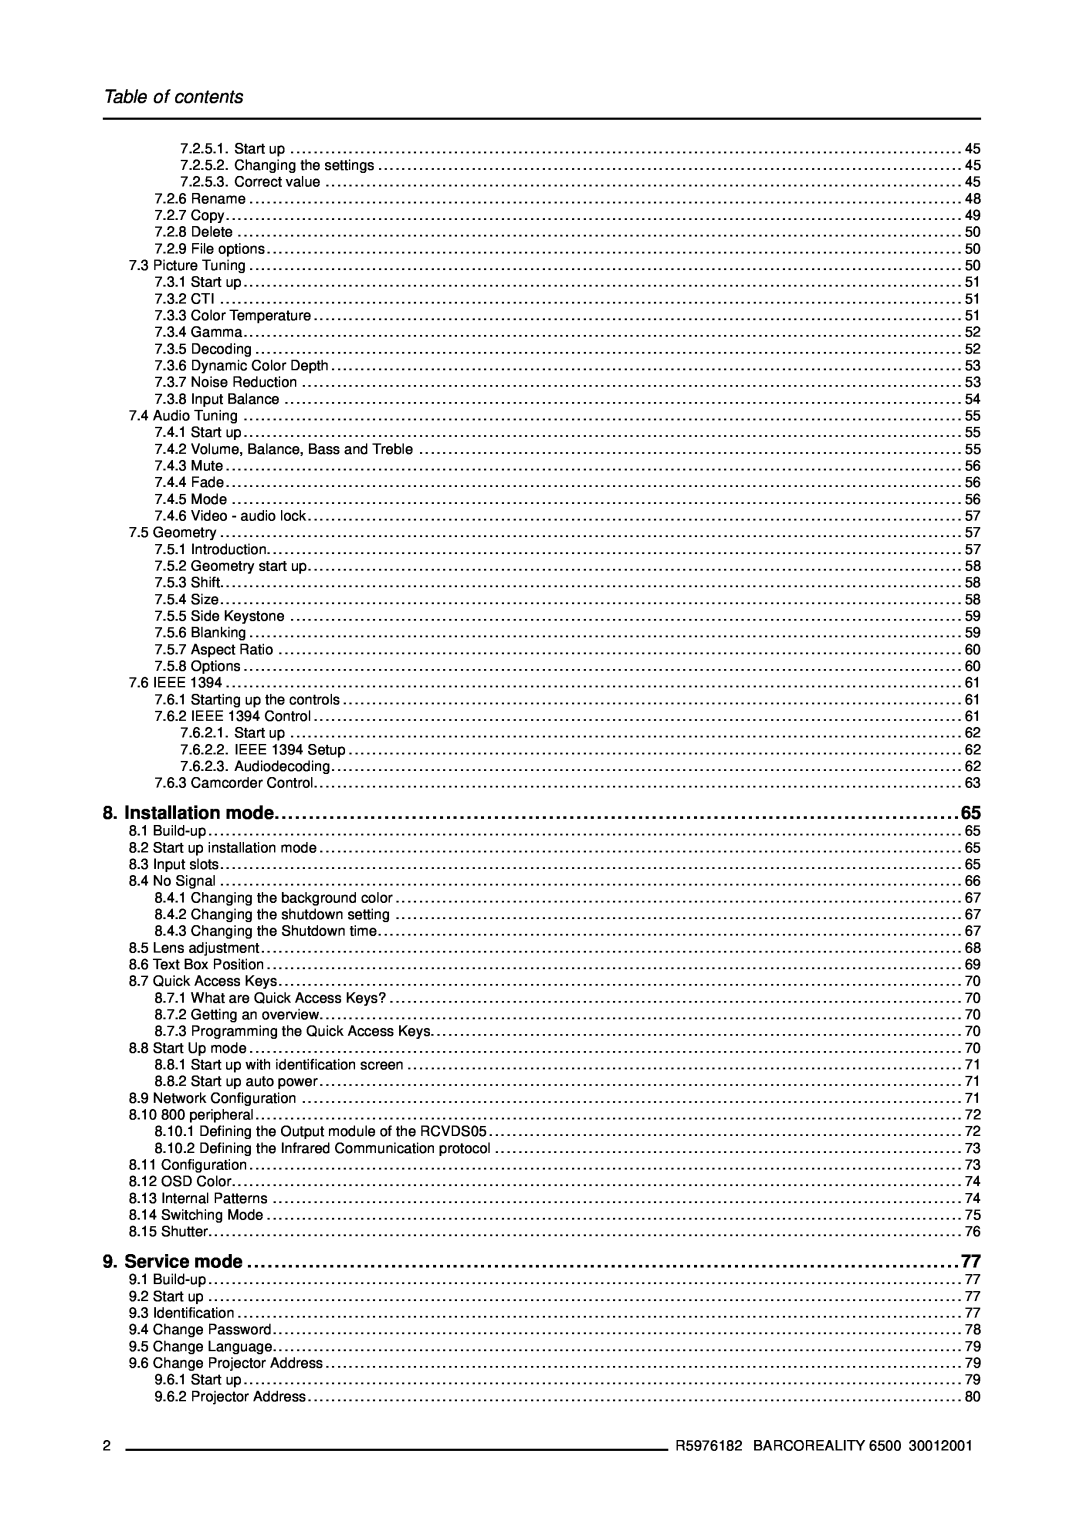 Barco R9001960 owner manual Service mode, Table of contents 